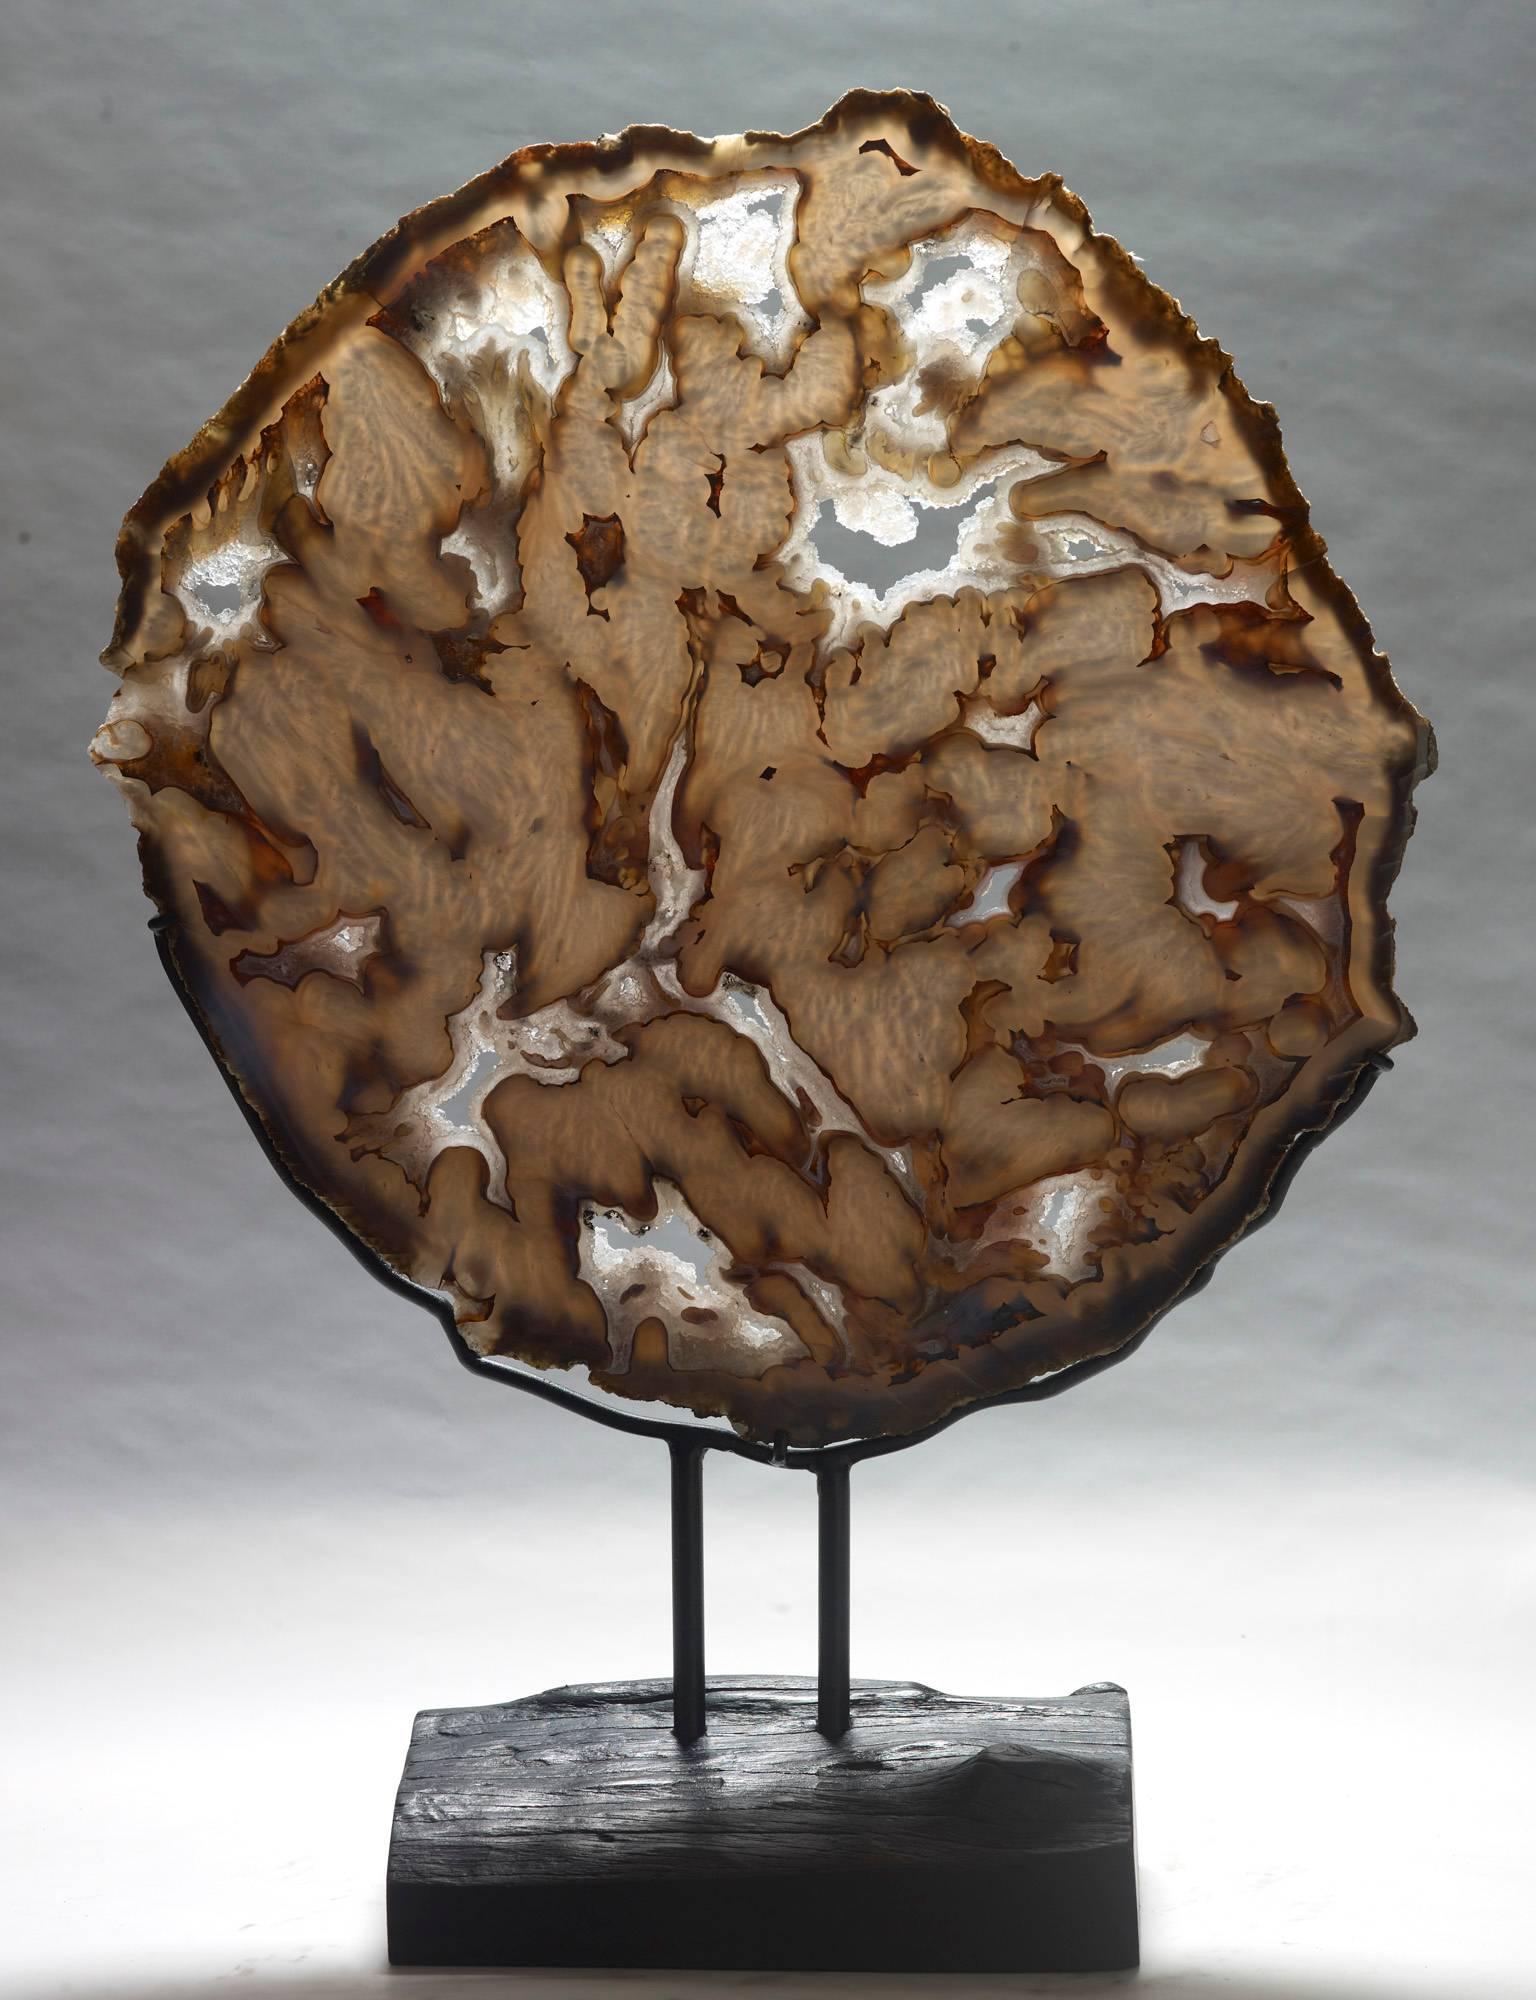 An exceptionally large slice of agate, polished on both sides. It is rare to find such a large piece without significant cracks or damage. Rio Grande do Sul, Brazil. Measures: 74 x 54 x 20 with stand.